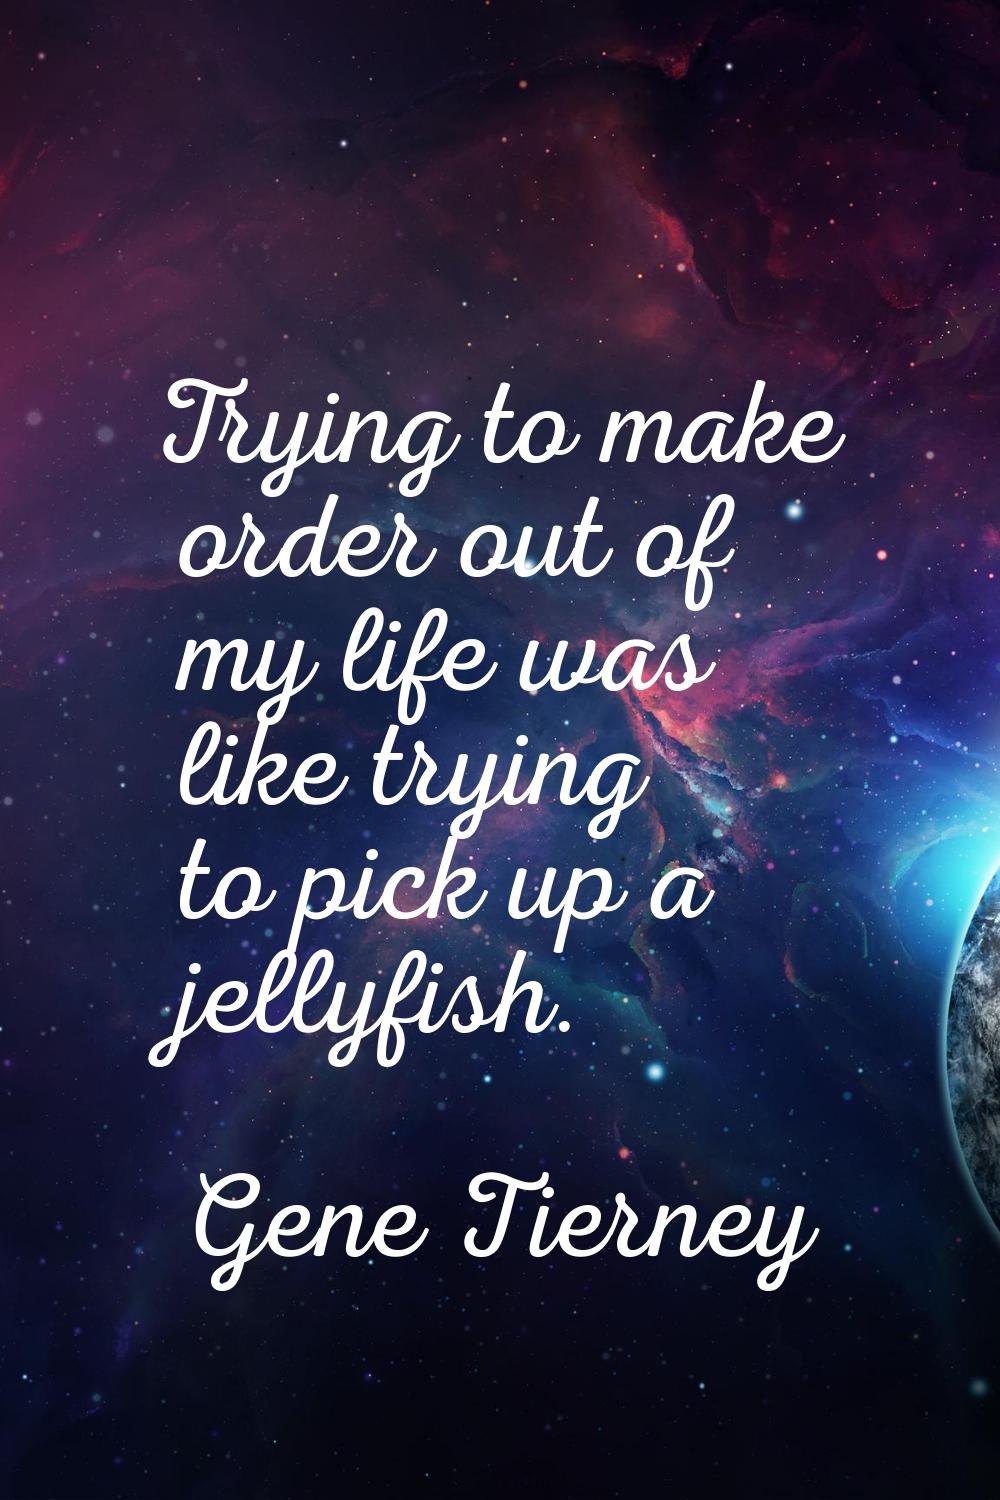 Trying to make order out of my life was like trying to pick up a jellyfish.